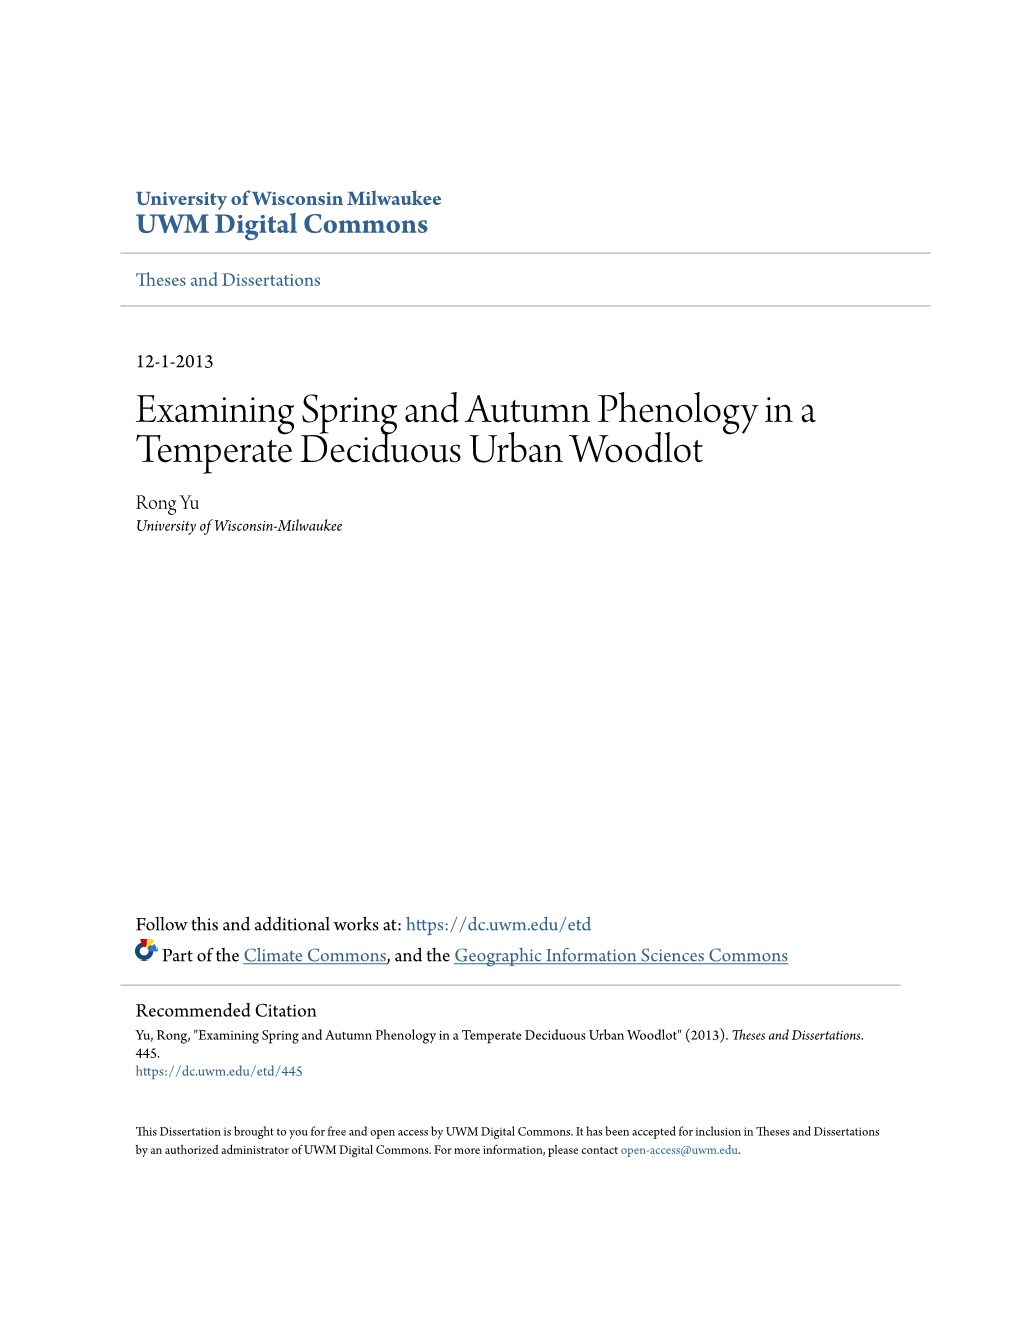 Examining Spring and Autumn Phenology in a Temperate Deciduous Urban Woodlot Rong Yu University of Wisconsin-Milwaukee